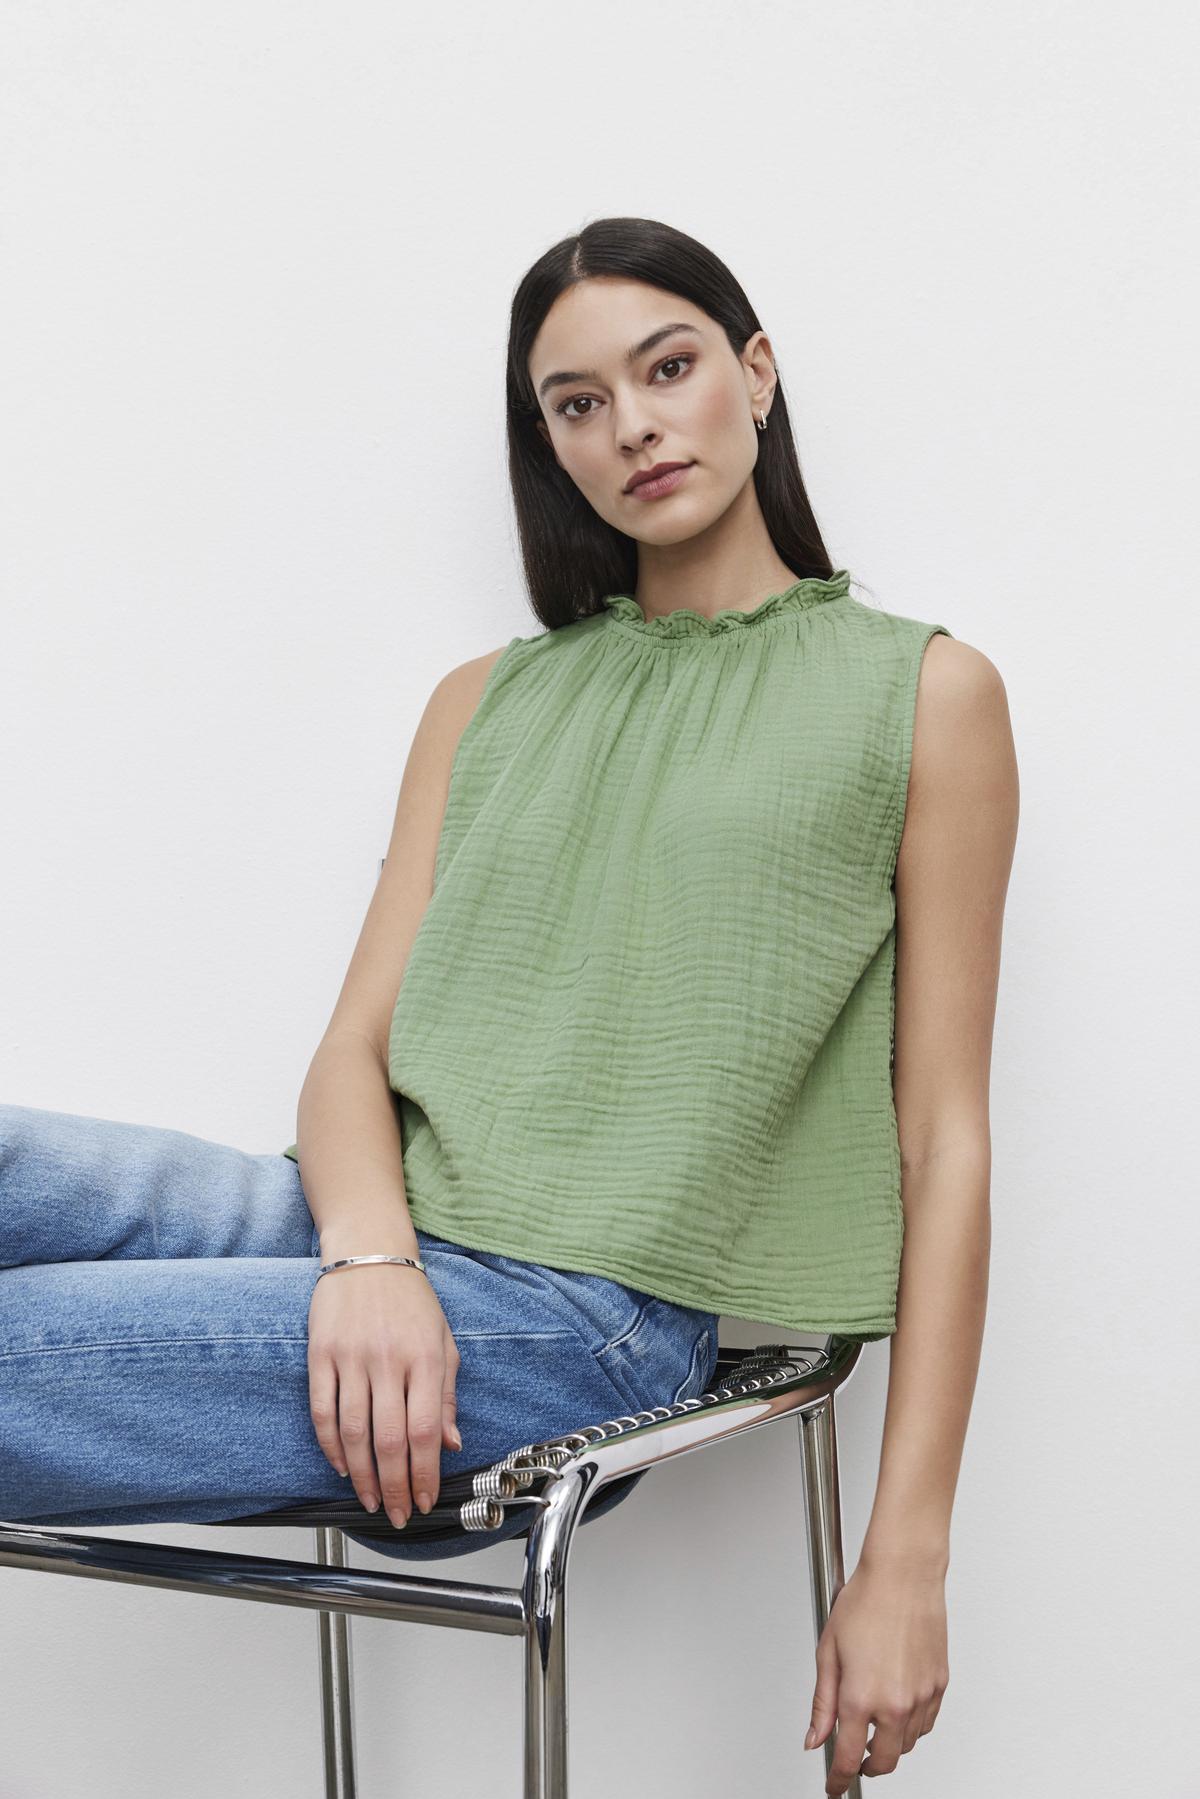 Woman in a green Velvet by Graham & Spencer BIANCA COTTON GAUZE TANK TOP with an elastic neckline and blue jeans sitting on a chrome chair against a white background.-36443616280769